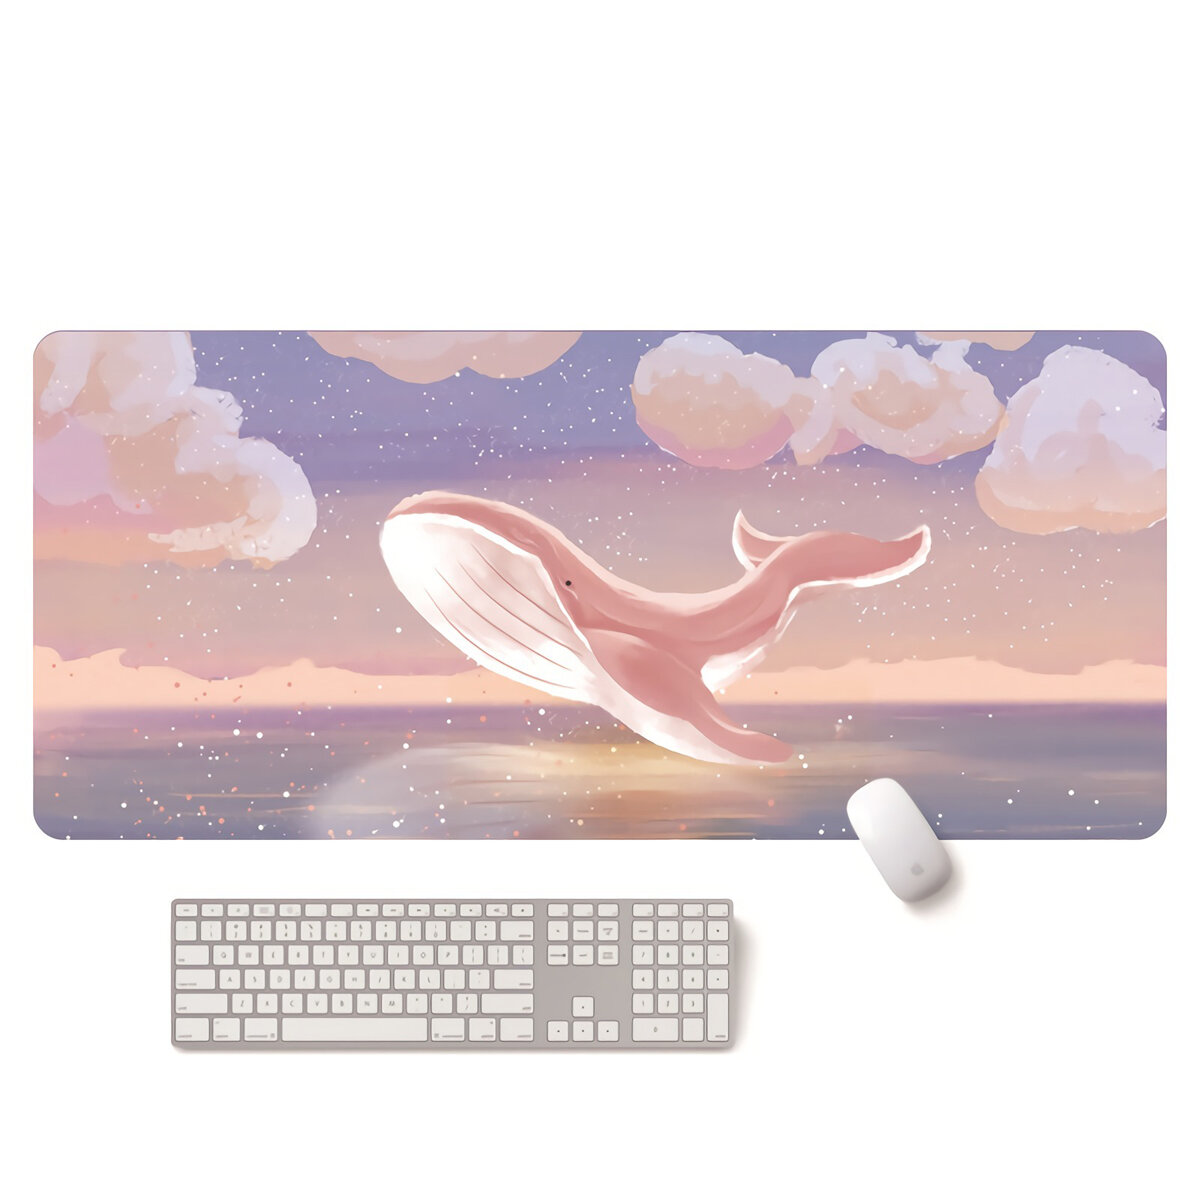 

Scenery Keyboard & Mouse Pad Whale and Sea Large Mouse Pad Keyboard Mat 800*300*2mm/900*400*2mm for Home Office